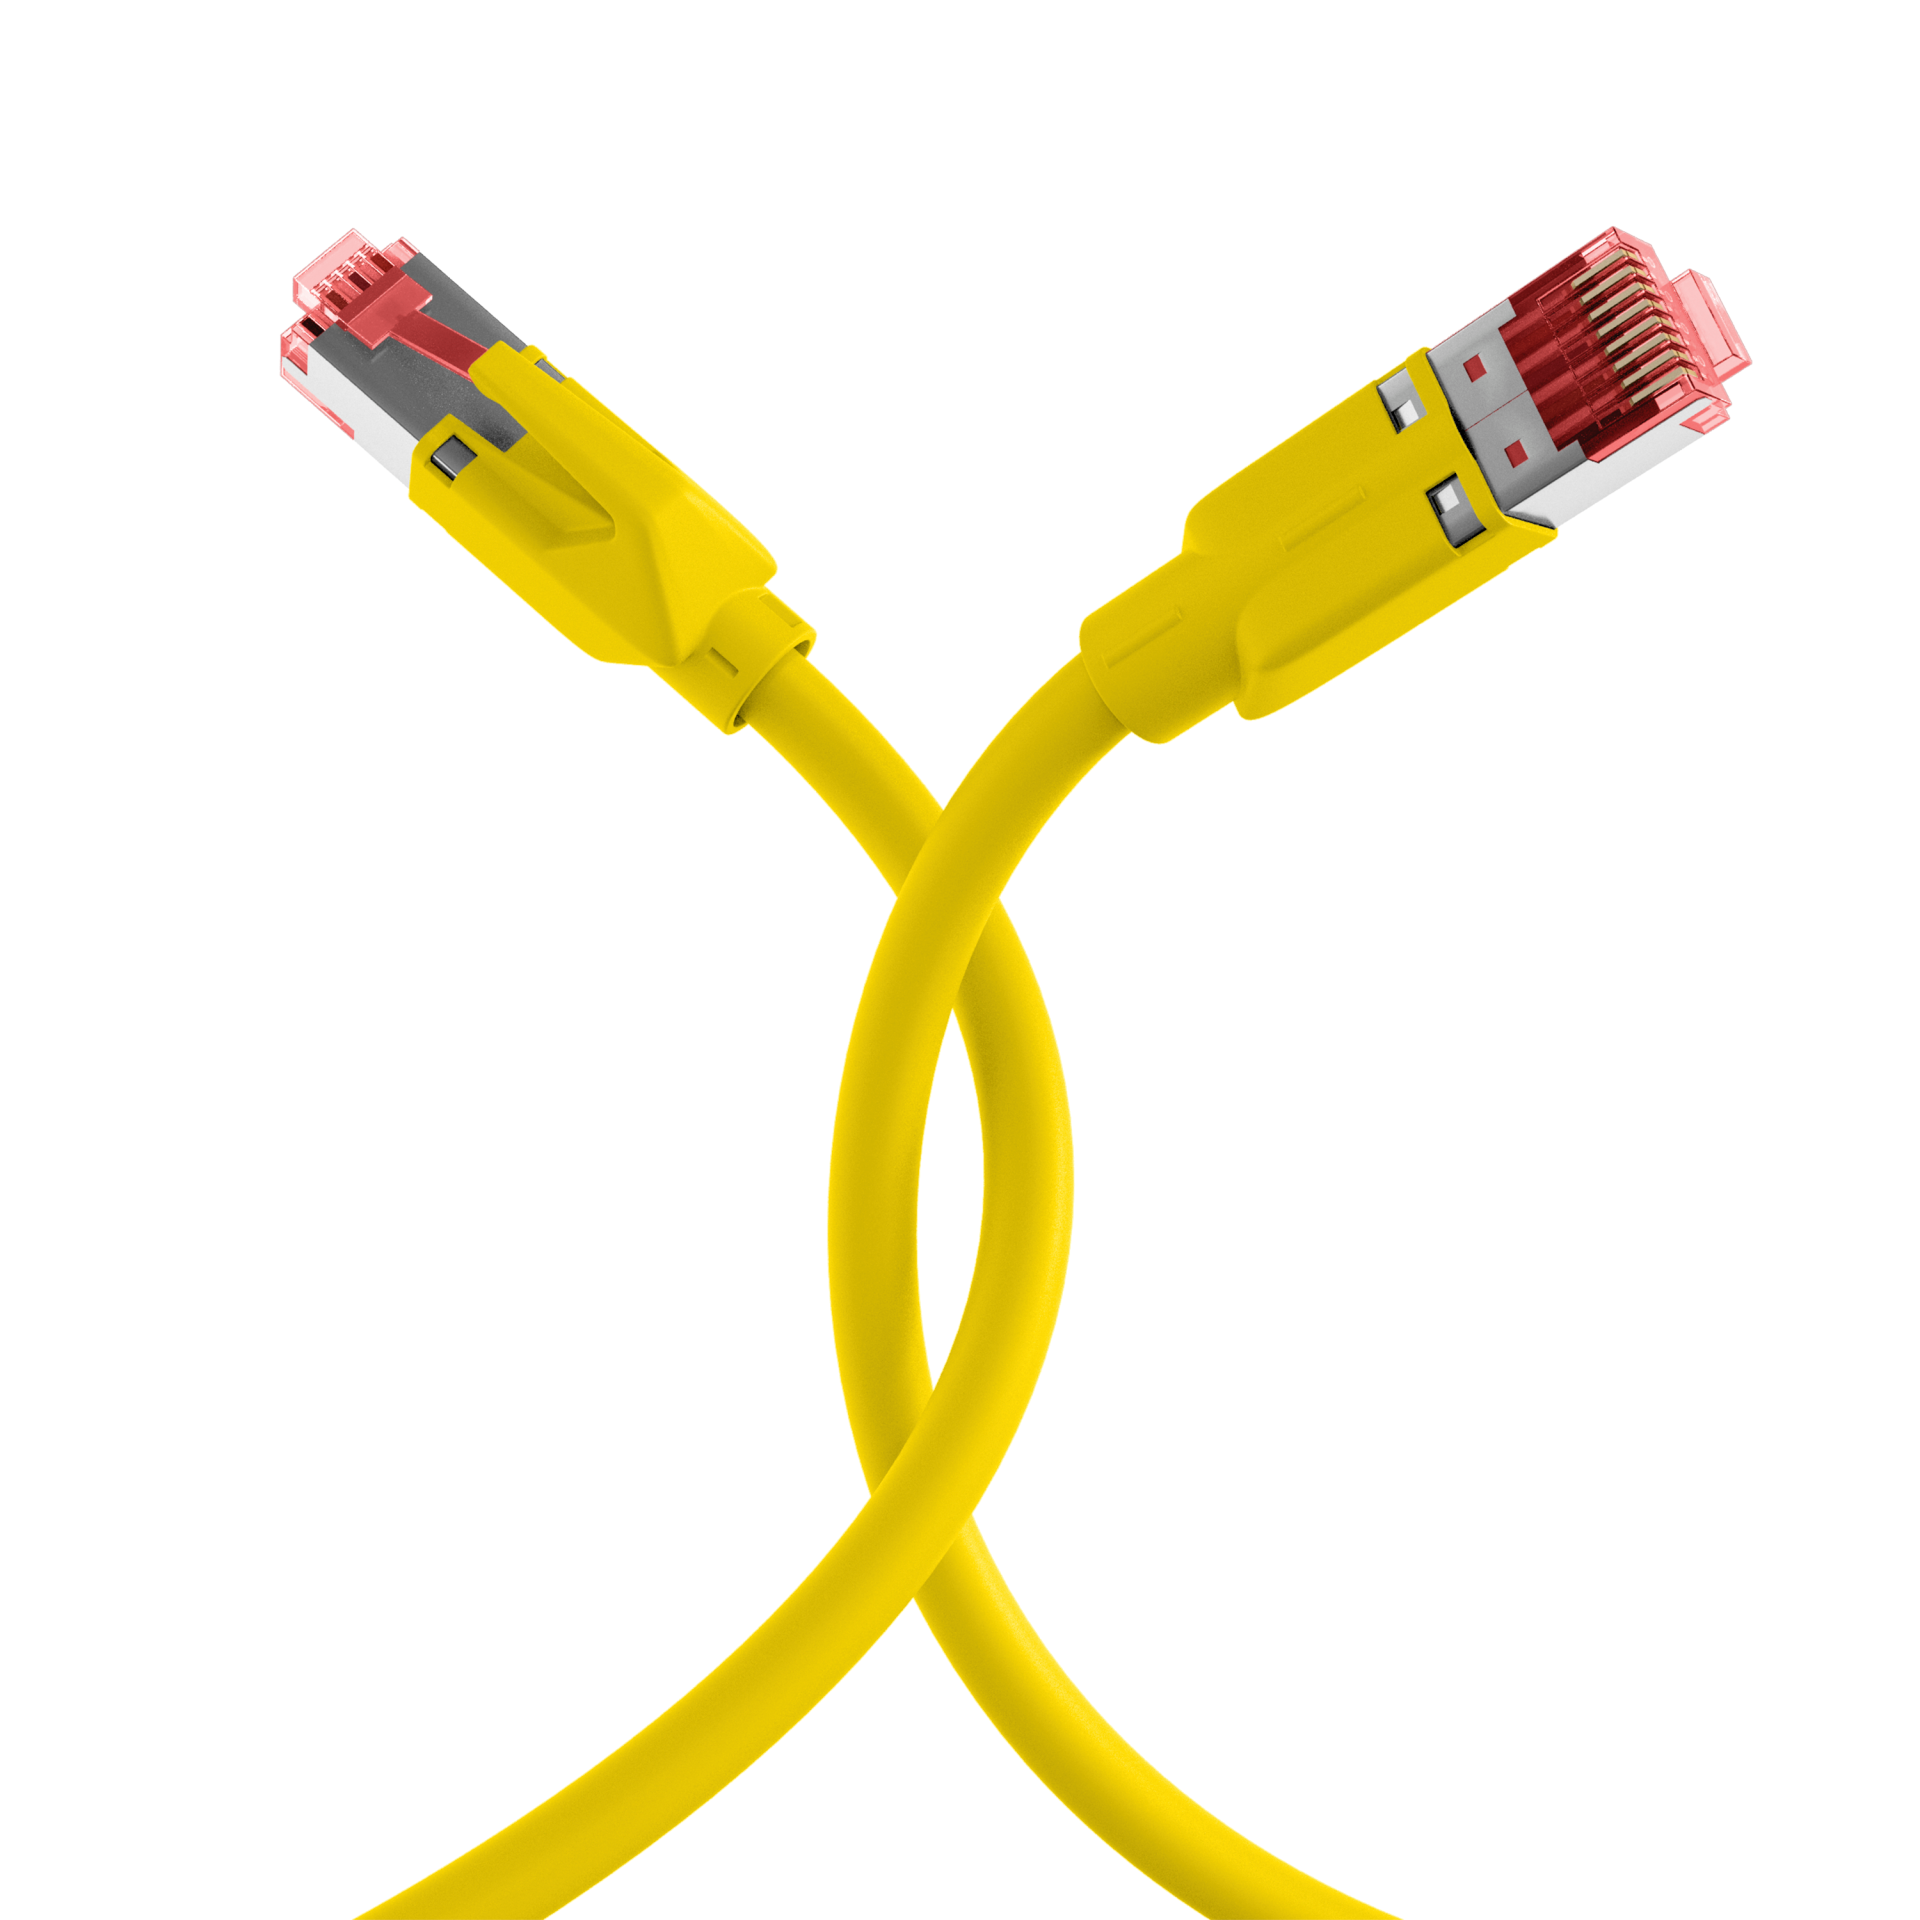 RJ45 Patch Cord Cat.5e SF/UTP PURTM21 for drag chains yellow 12m